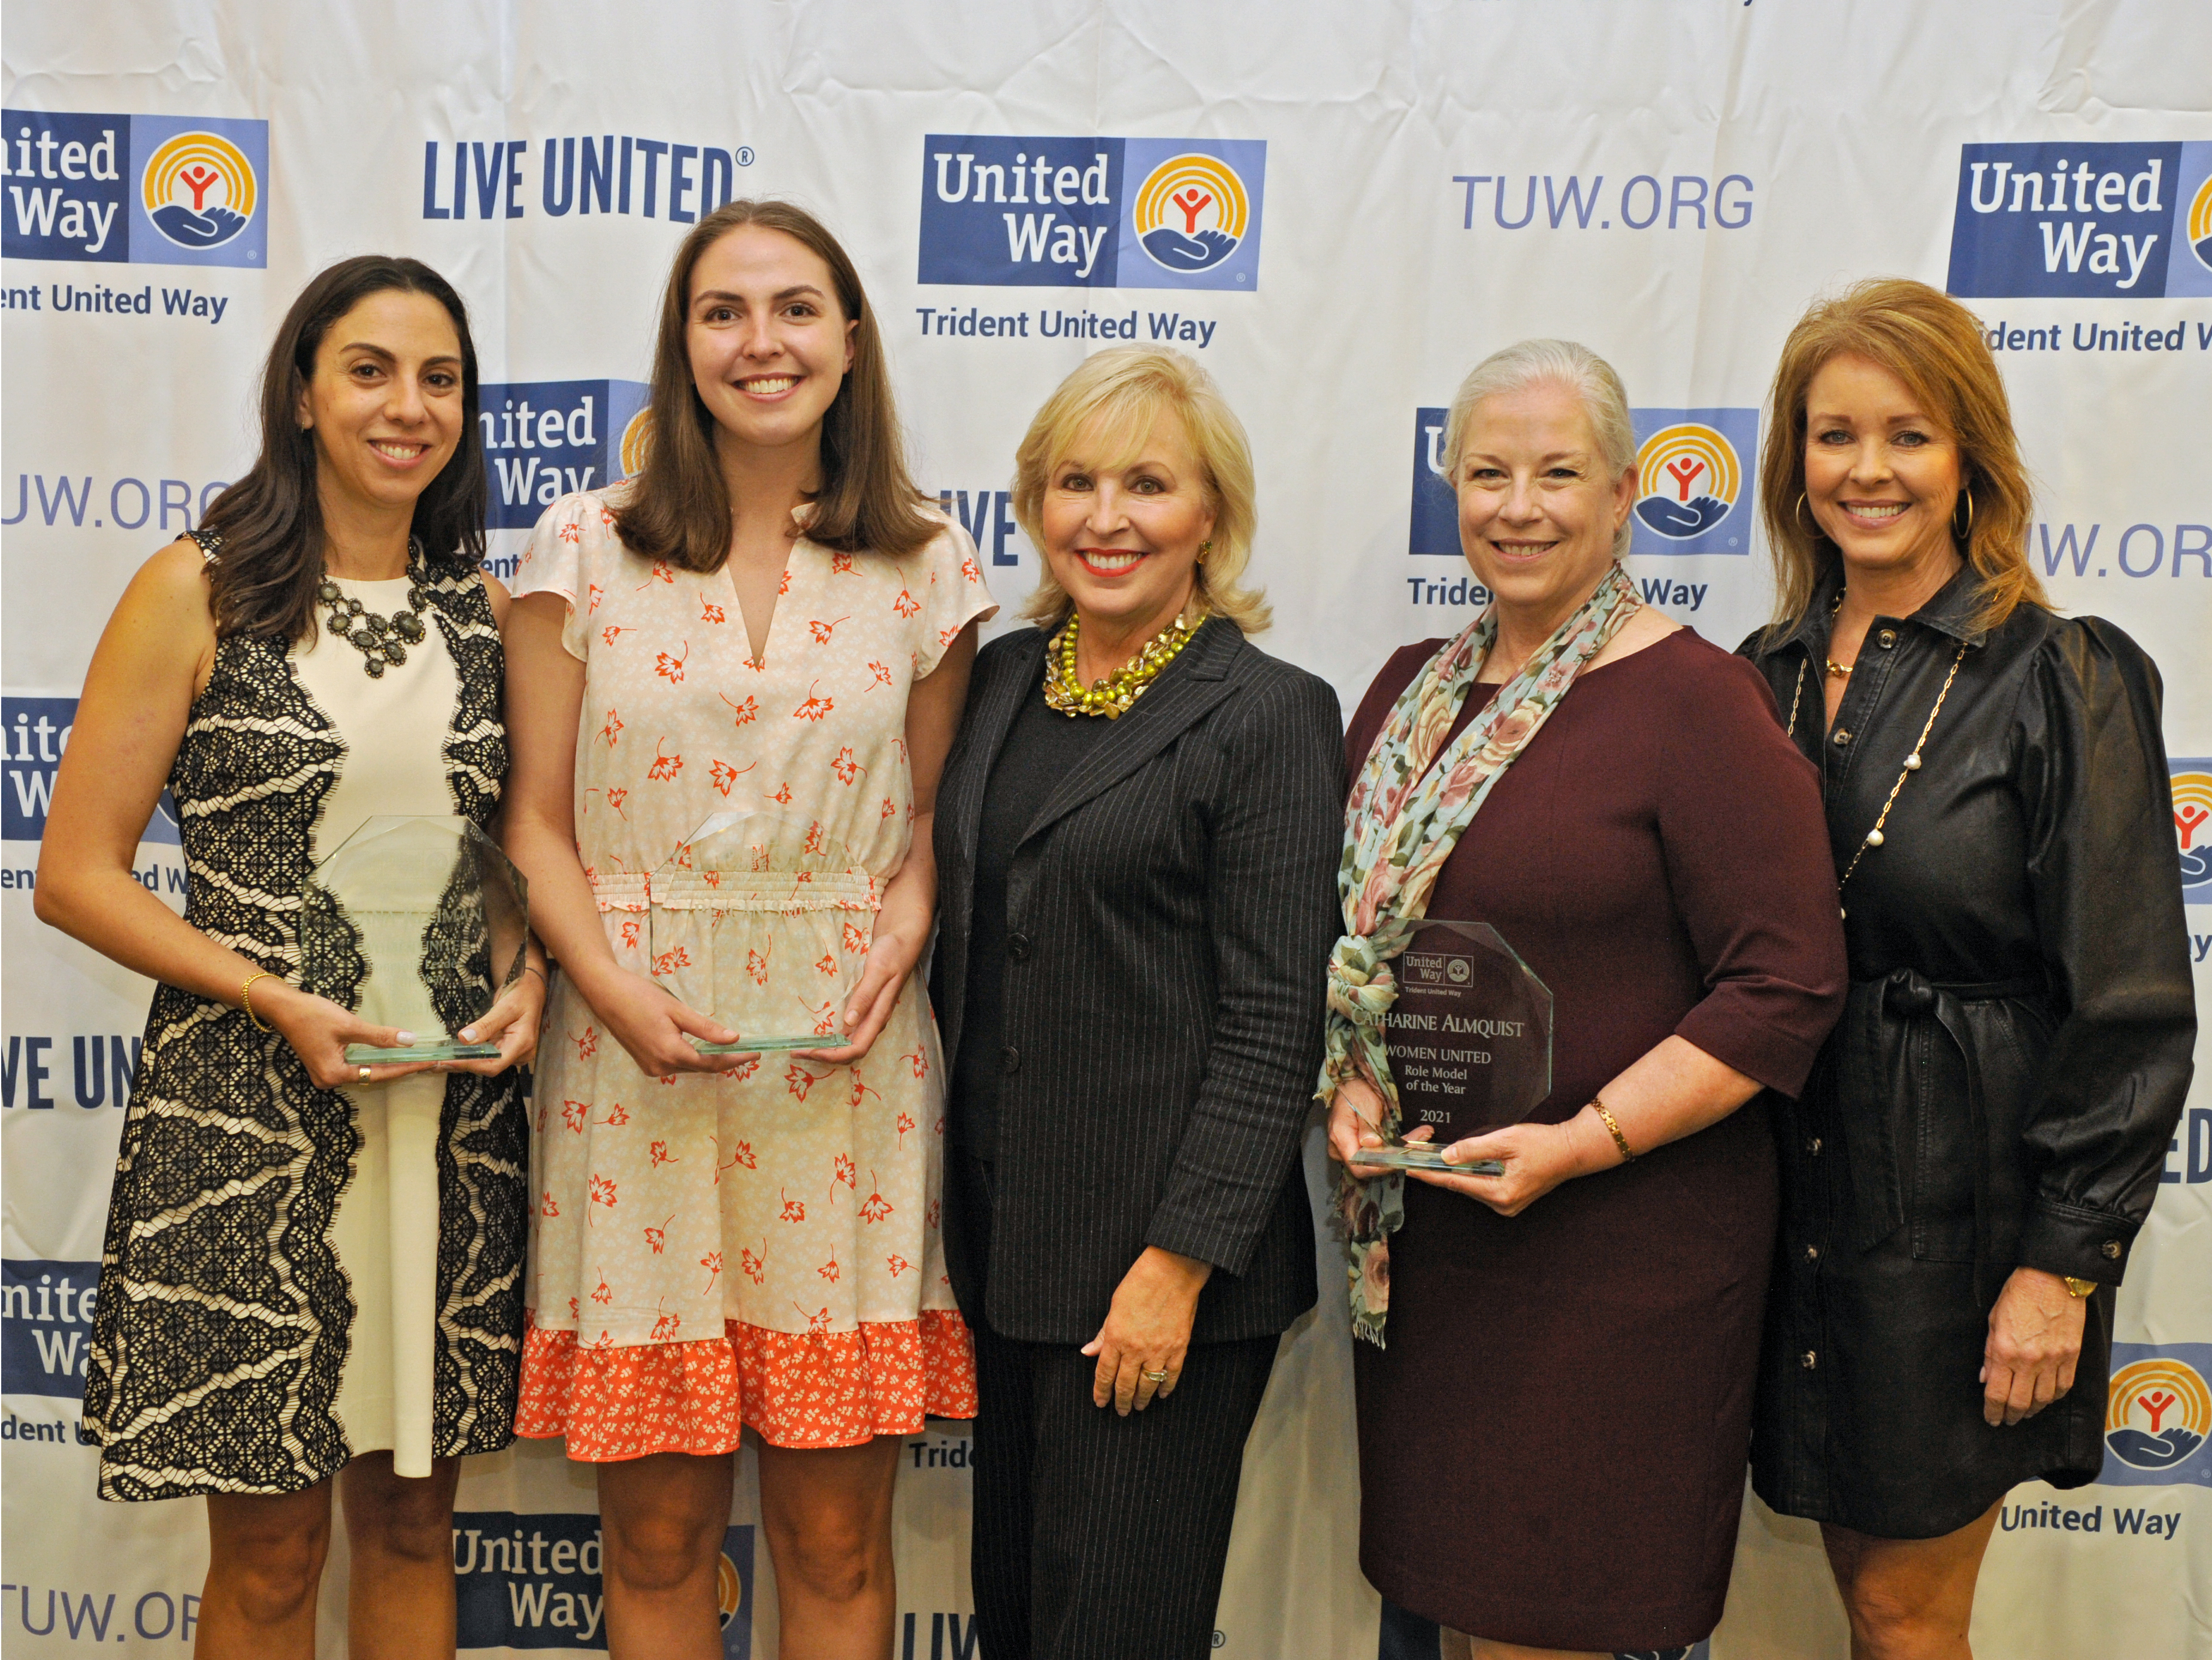 “Five women stand and smile in front of a Trident United Way background. Three are the event’s honorees holding their awards.”